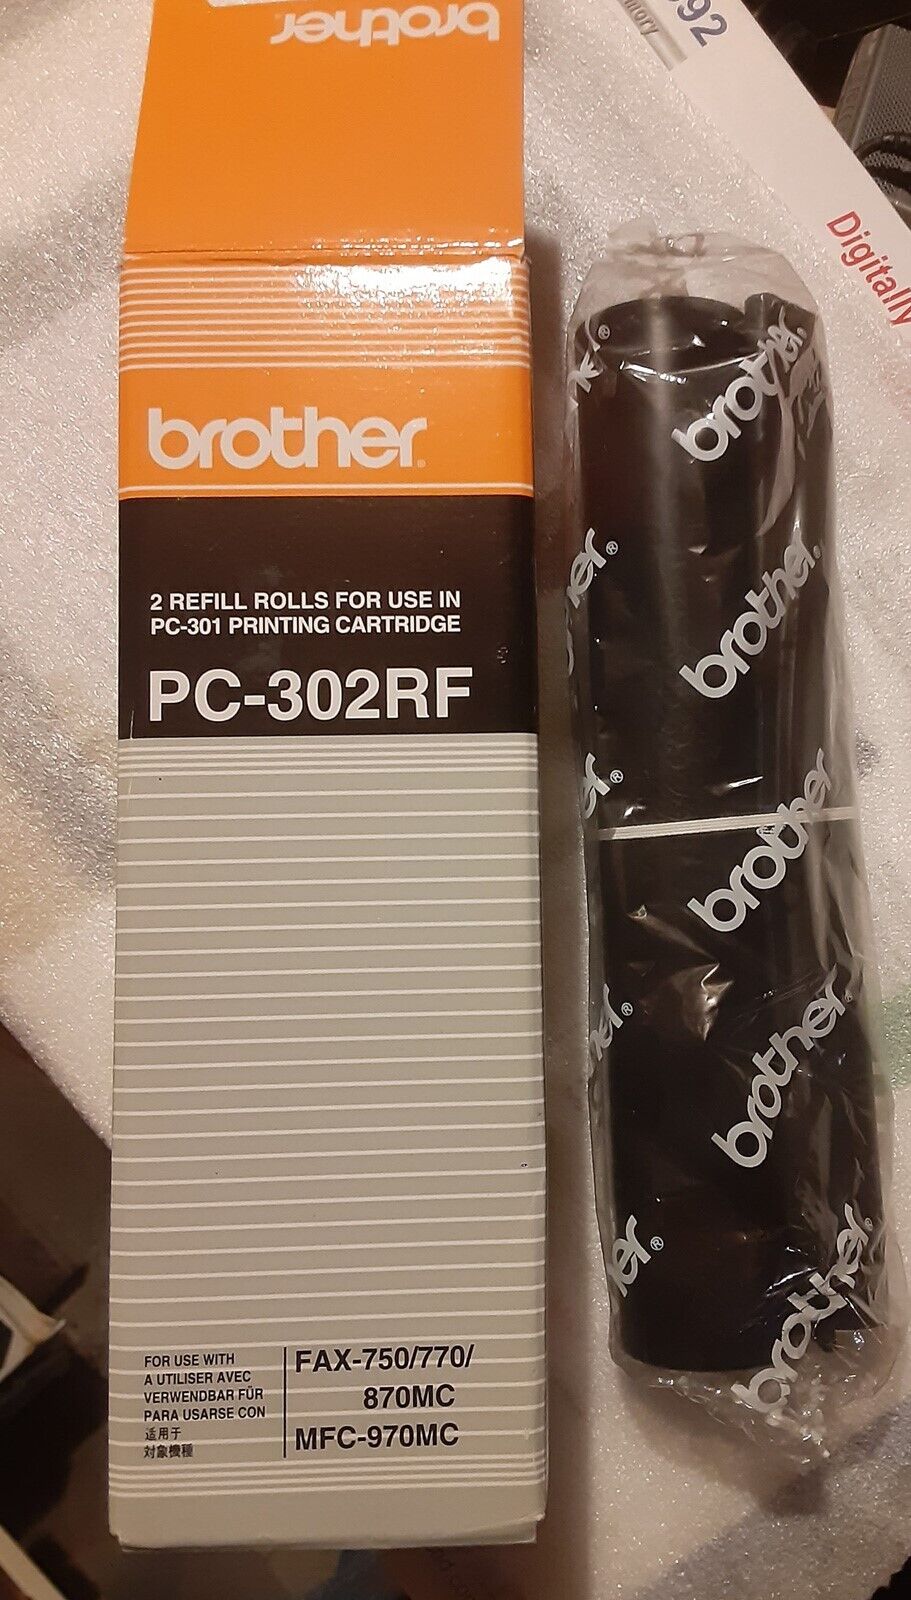 *ONE* OEM Brother PC-302RF Refill Roll for Brother PC-301 Printing Cartridges